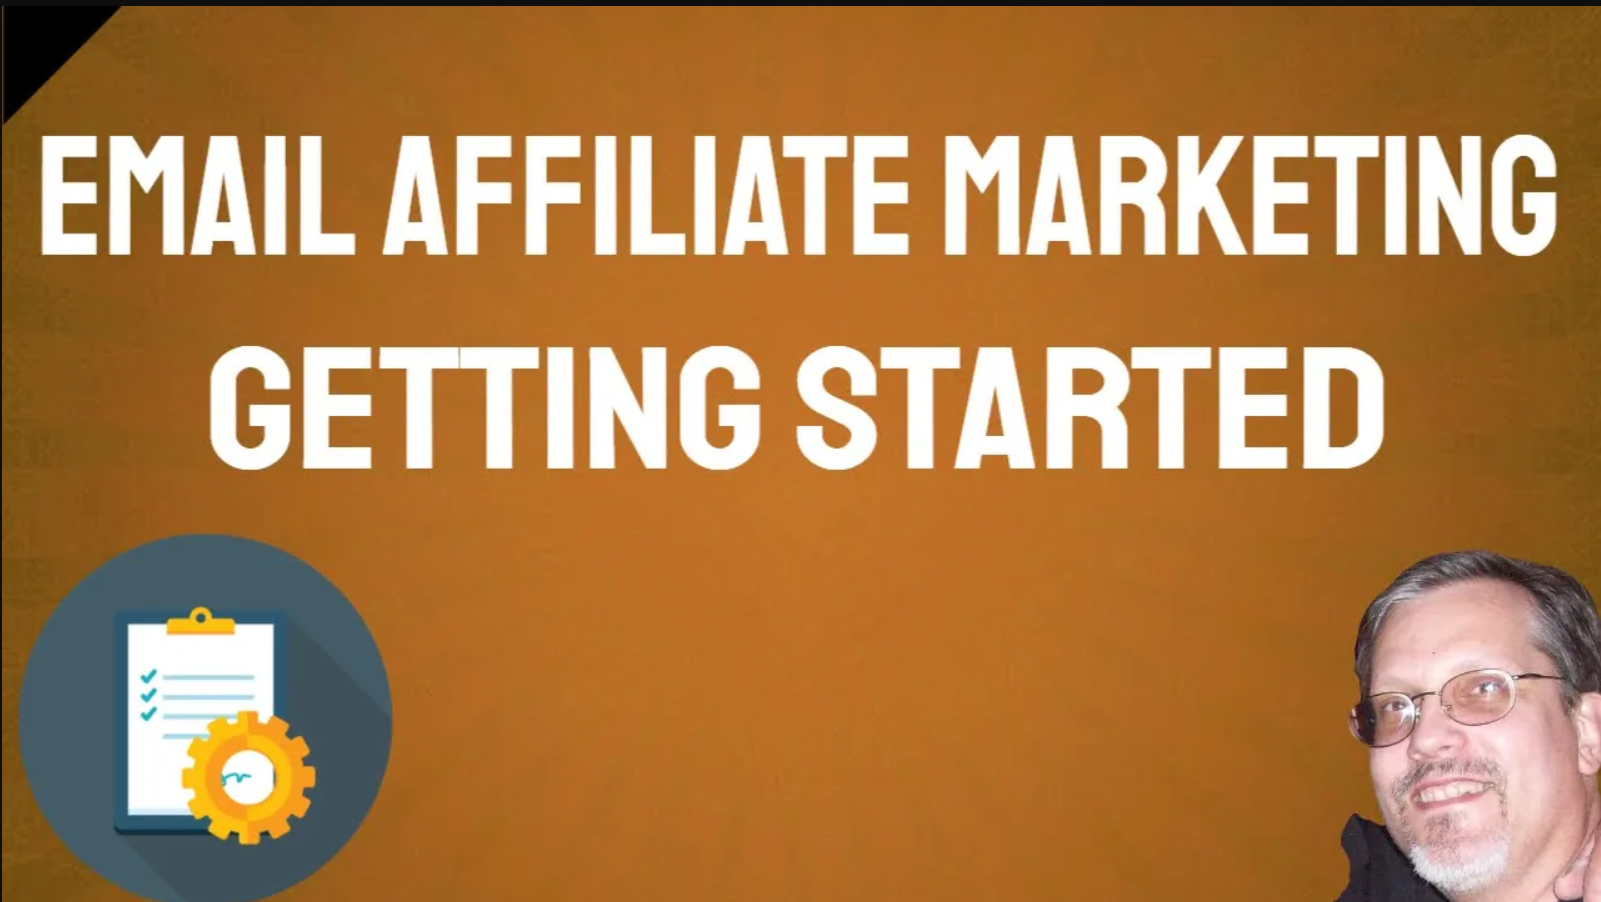 Mark Dwayne affiliate marketing training,How to Start Affiliate Marketing,Affiliate marketing success,Affiliate Marketing Traffic,Affiliate Marketing,Email Marketing,Email Marketing Basics, Affiliate Marketing, Autoresponder, Lead Magnet, AWeber, Email List Building, Promotional Emails, Audience Engagement, Conversions, Email Marketing Strategy